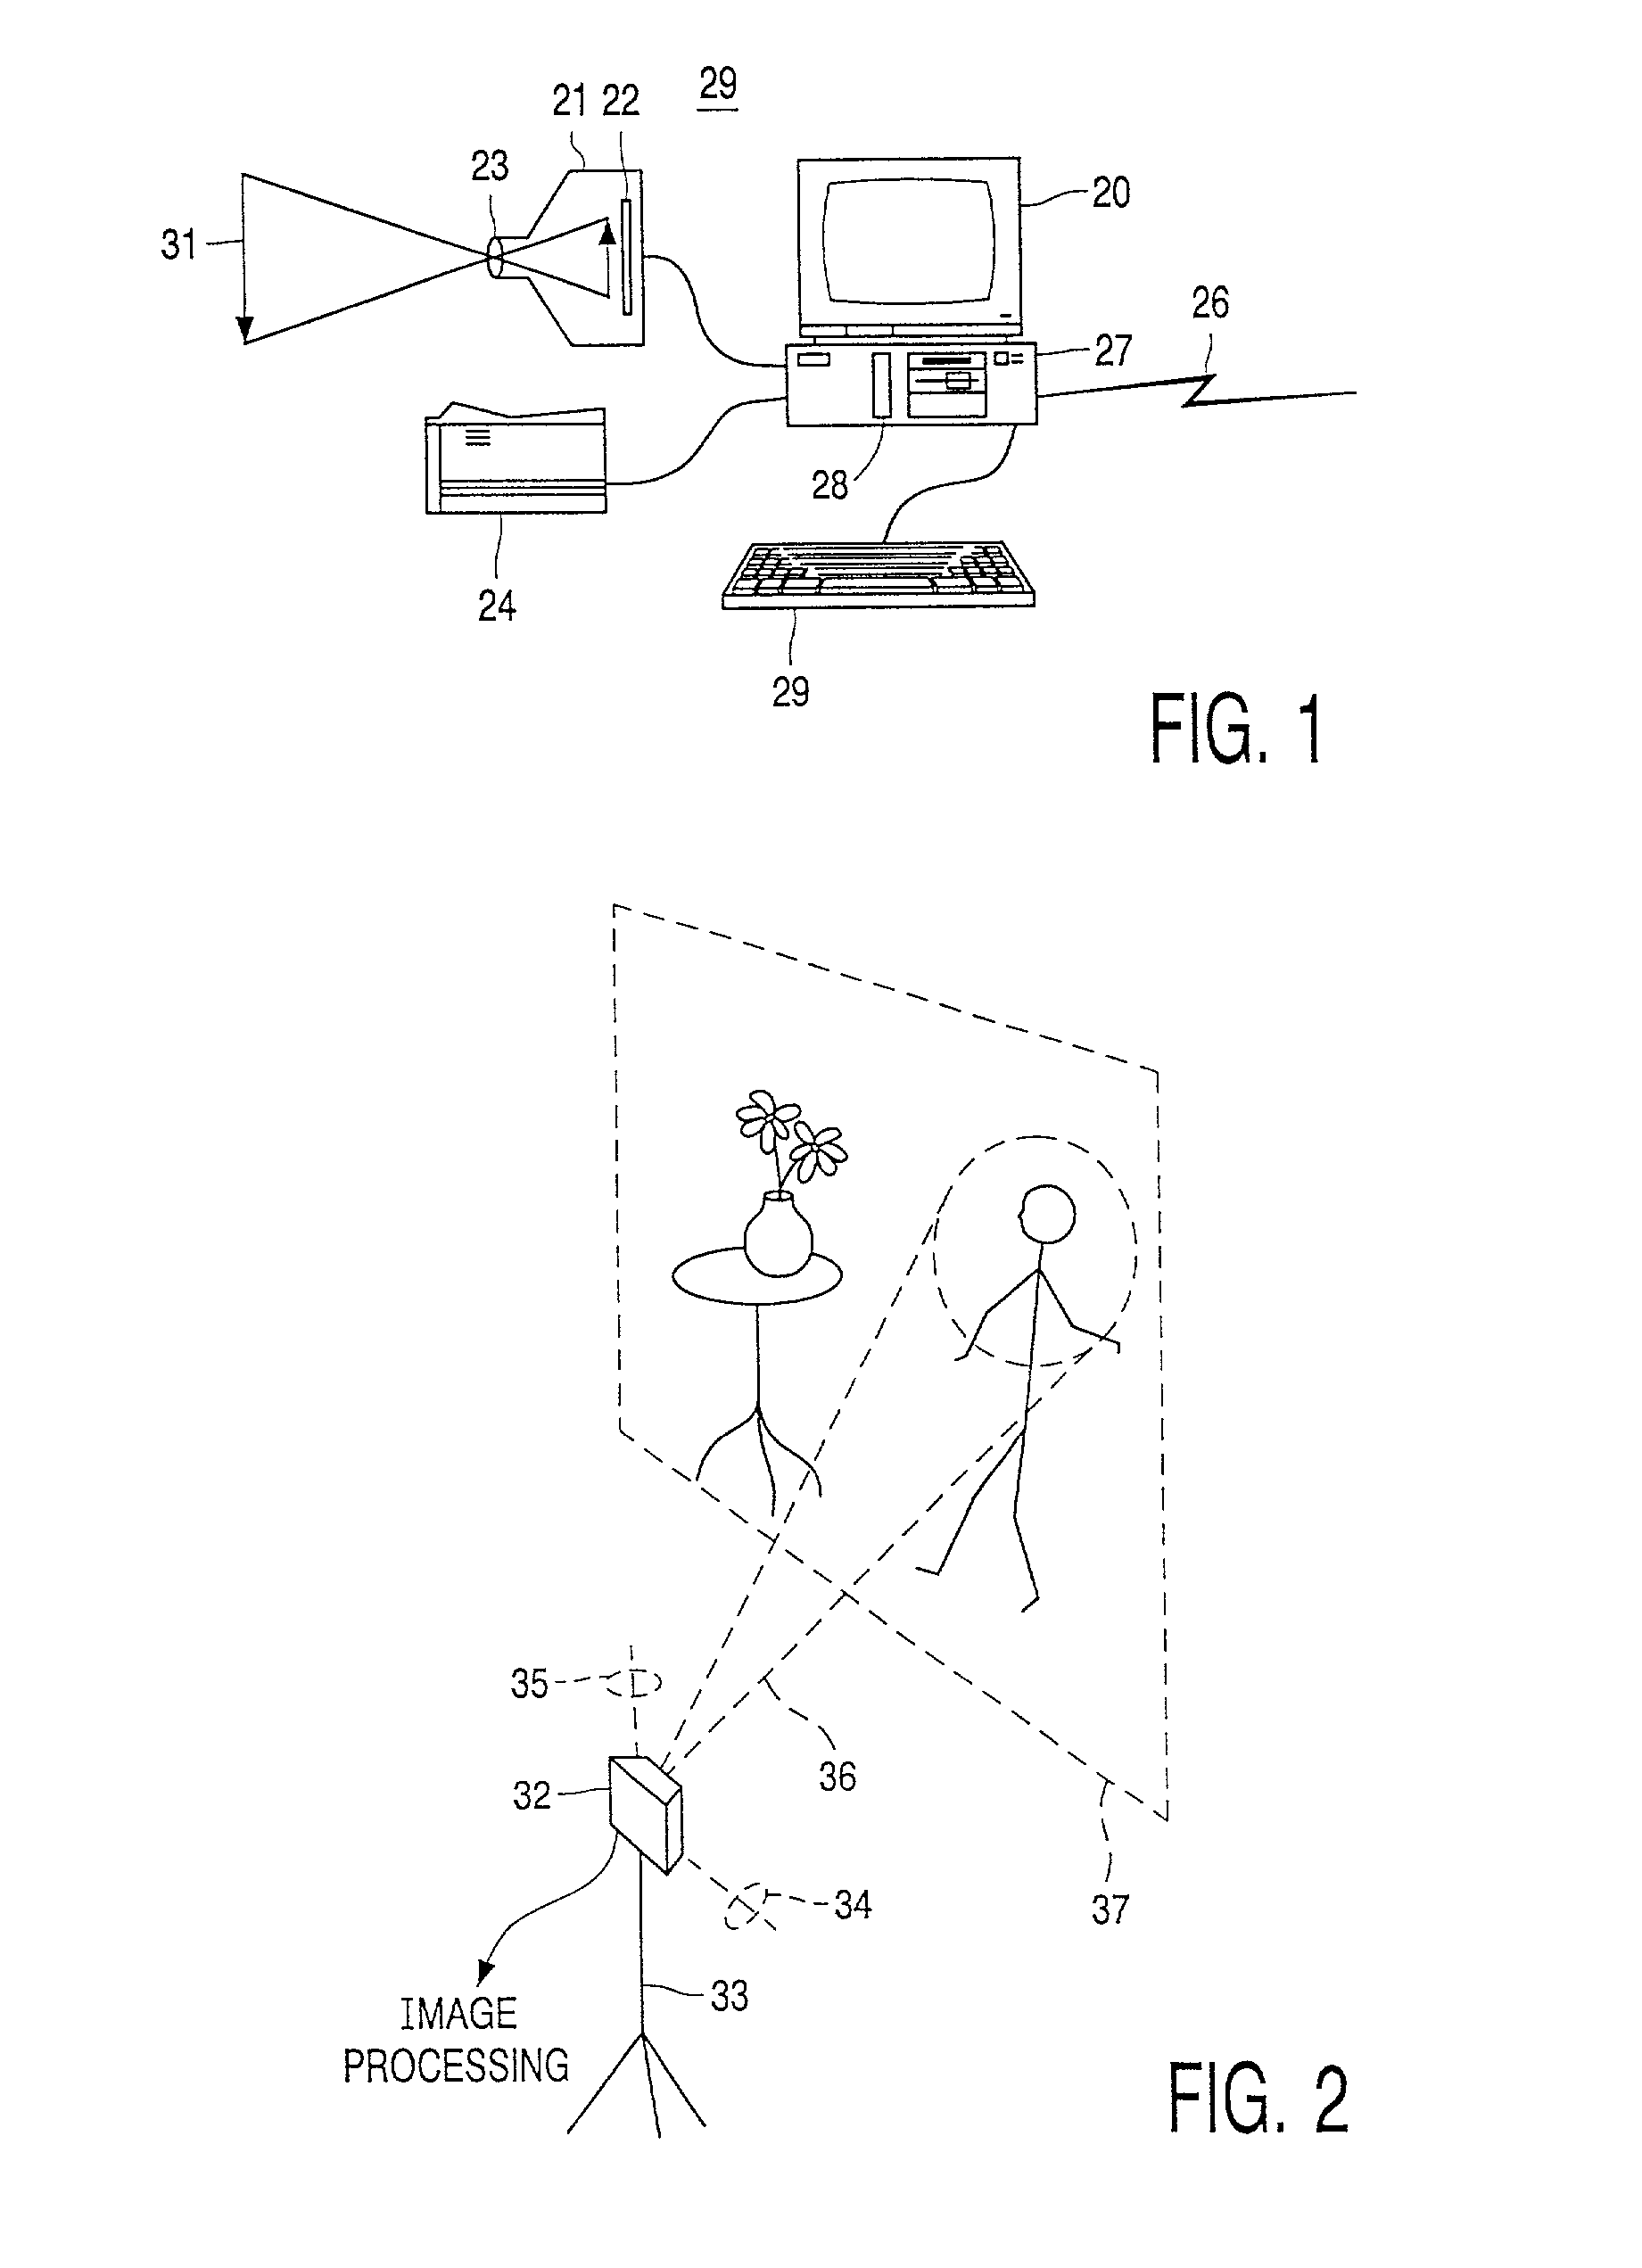 Method and apparatus for merging images into a composit image